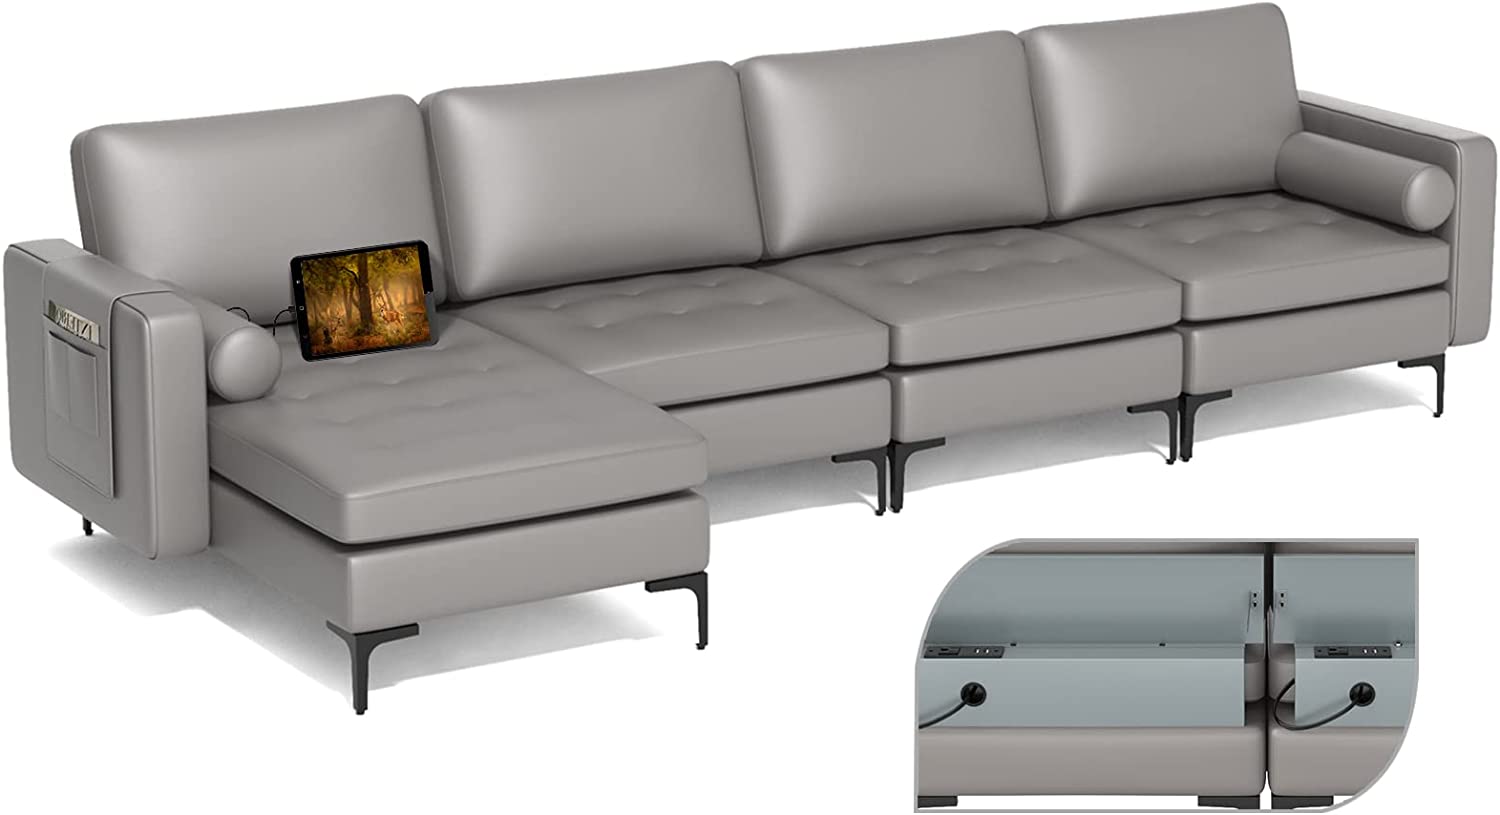 Giantex Sectional Sofa Couch, Convertible Sleeper with 2 or 1 USB Ports Socket